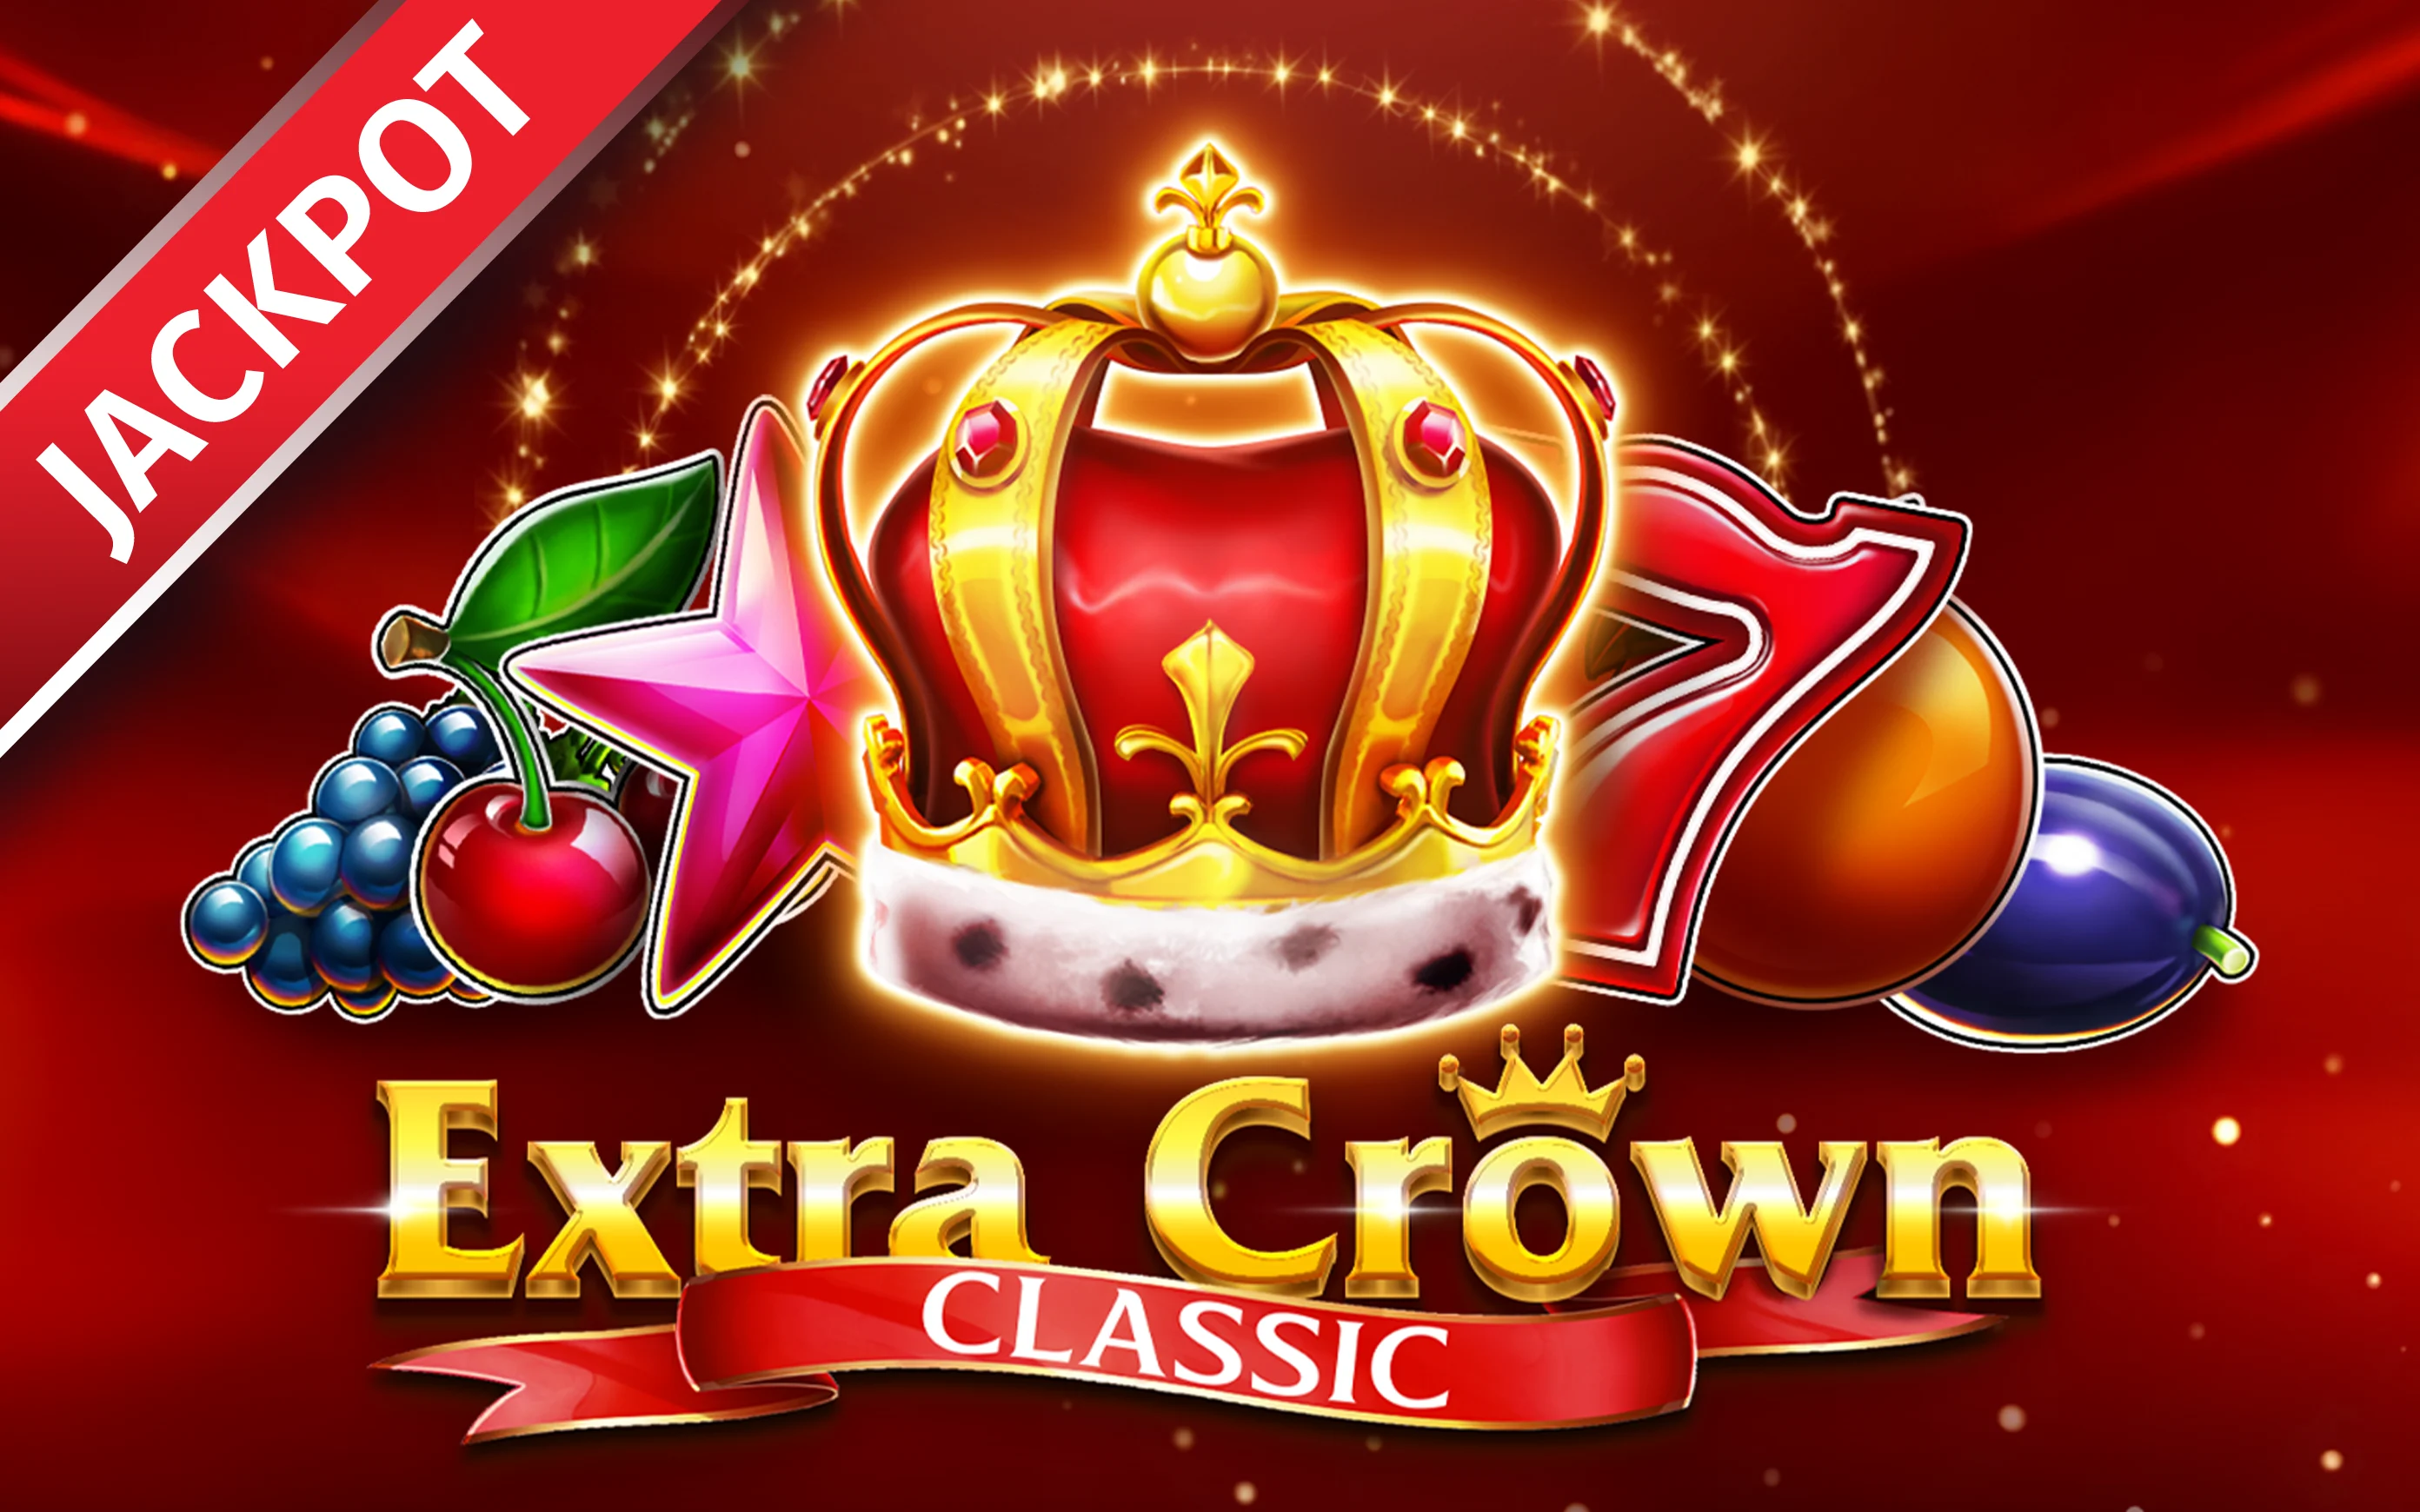 Play Extra Crown Classic on Starcasino.be online casino